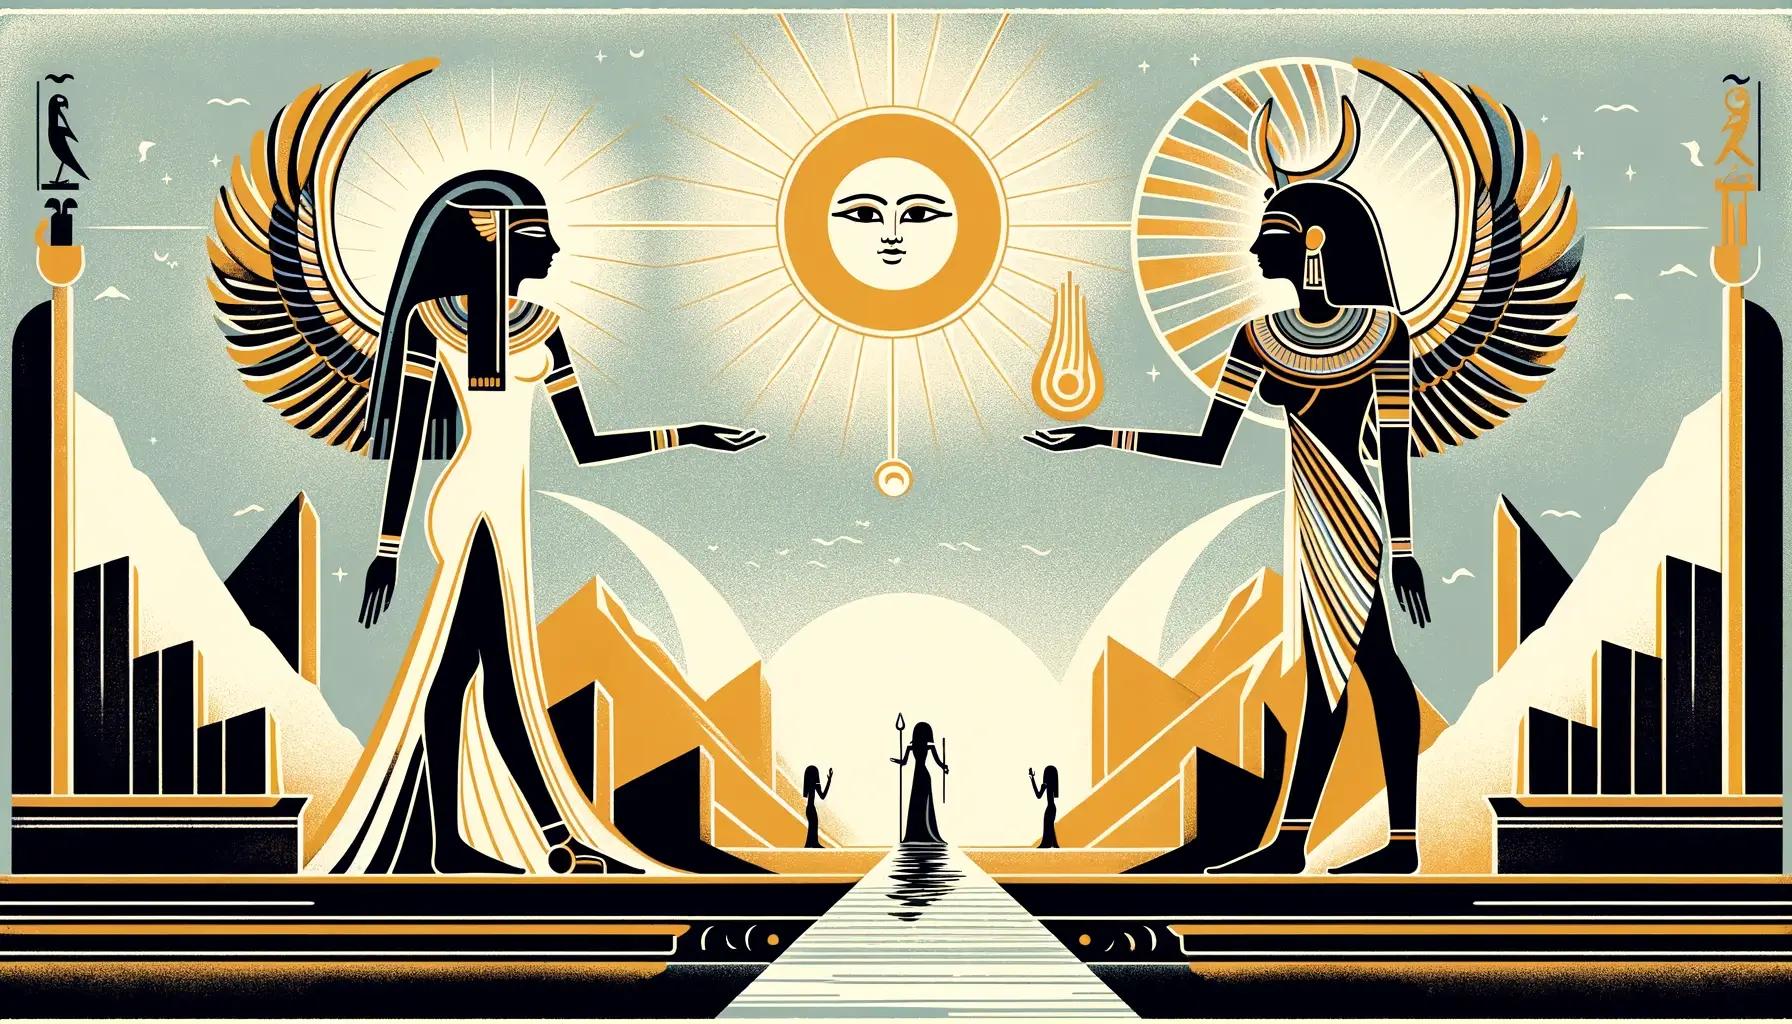 Nephthys vs Aten: The Guardian of the Dead vs The Sun Disk